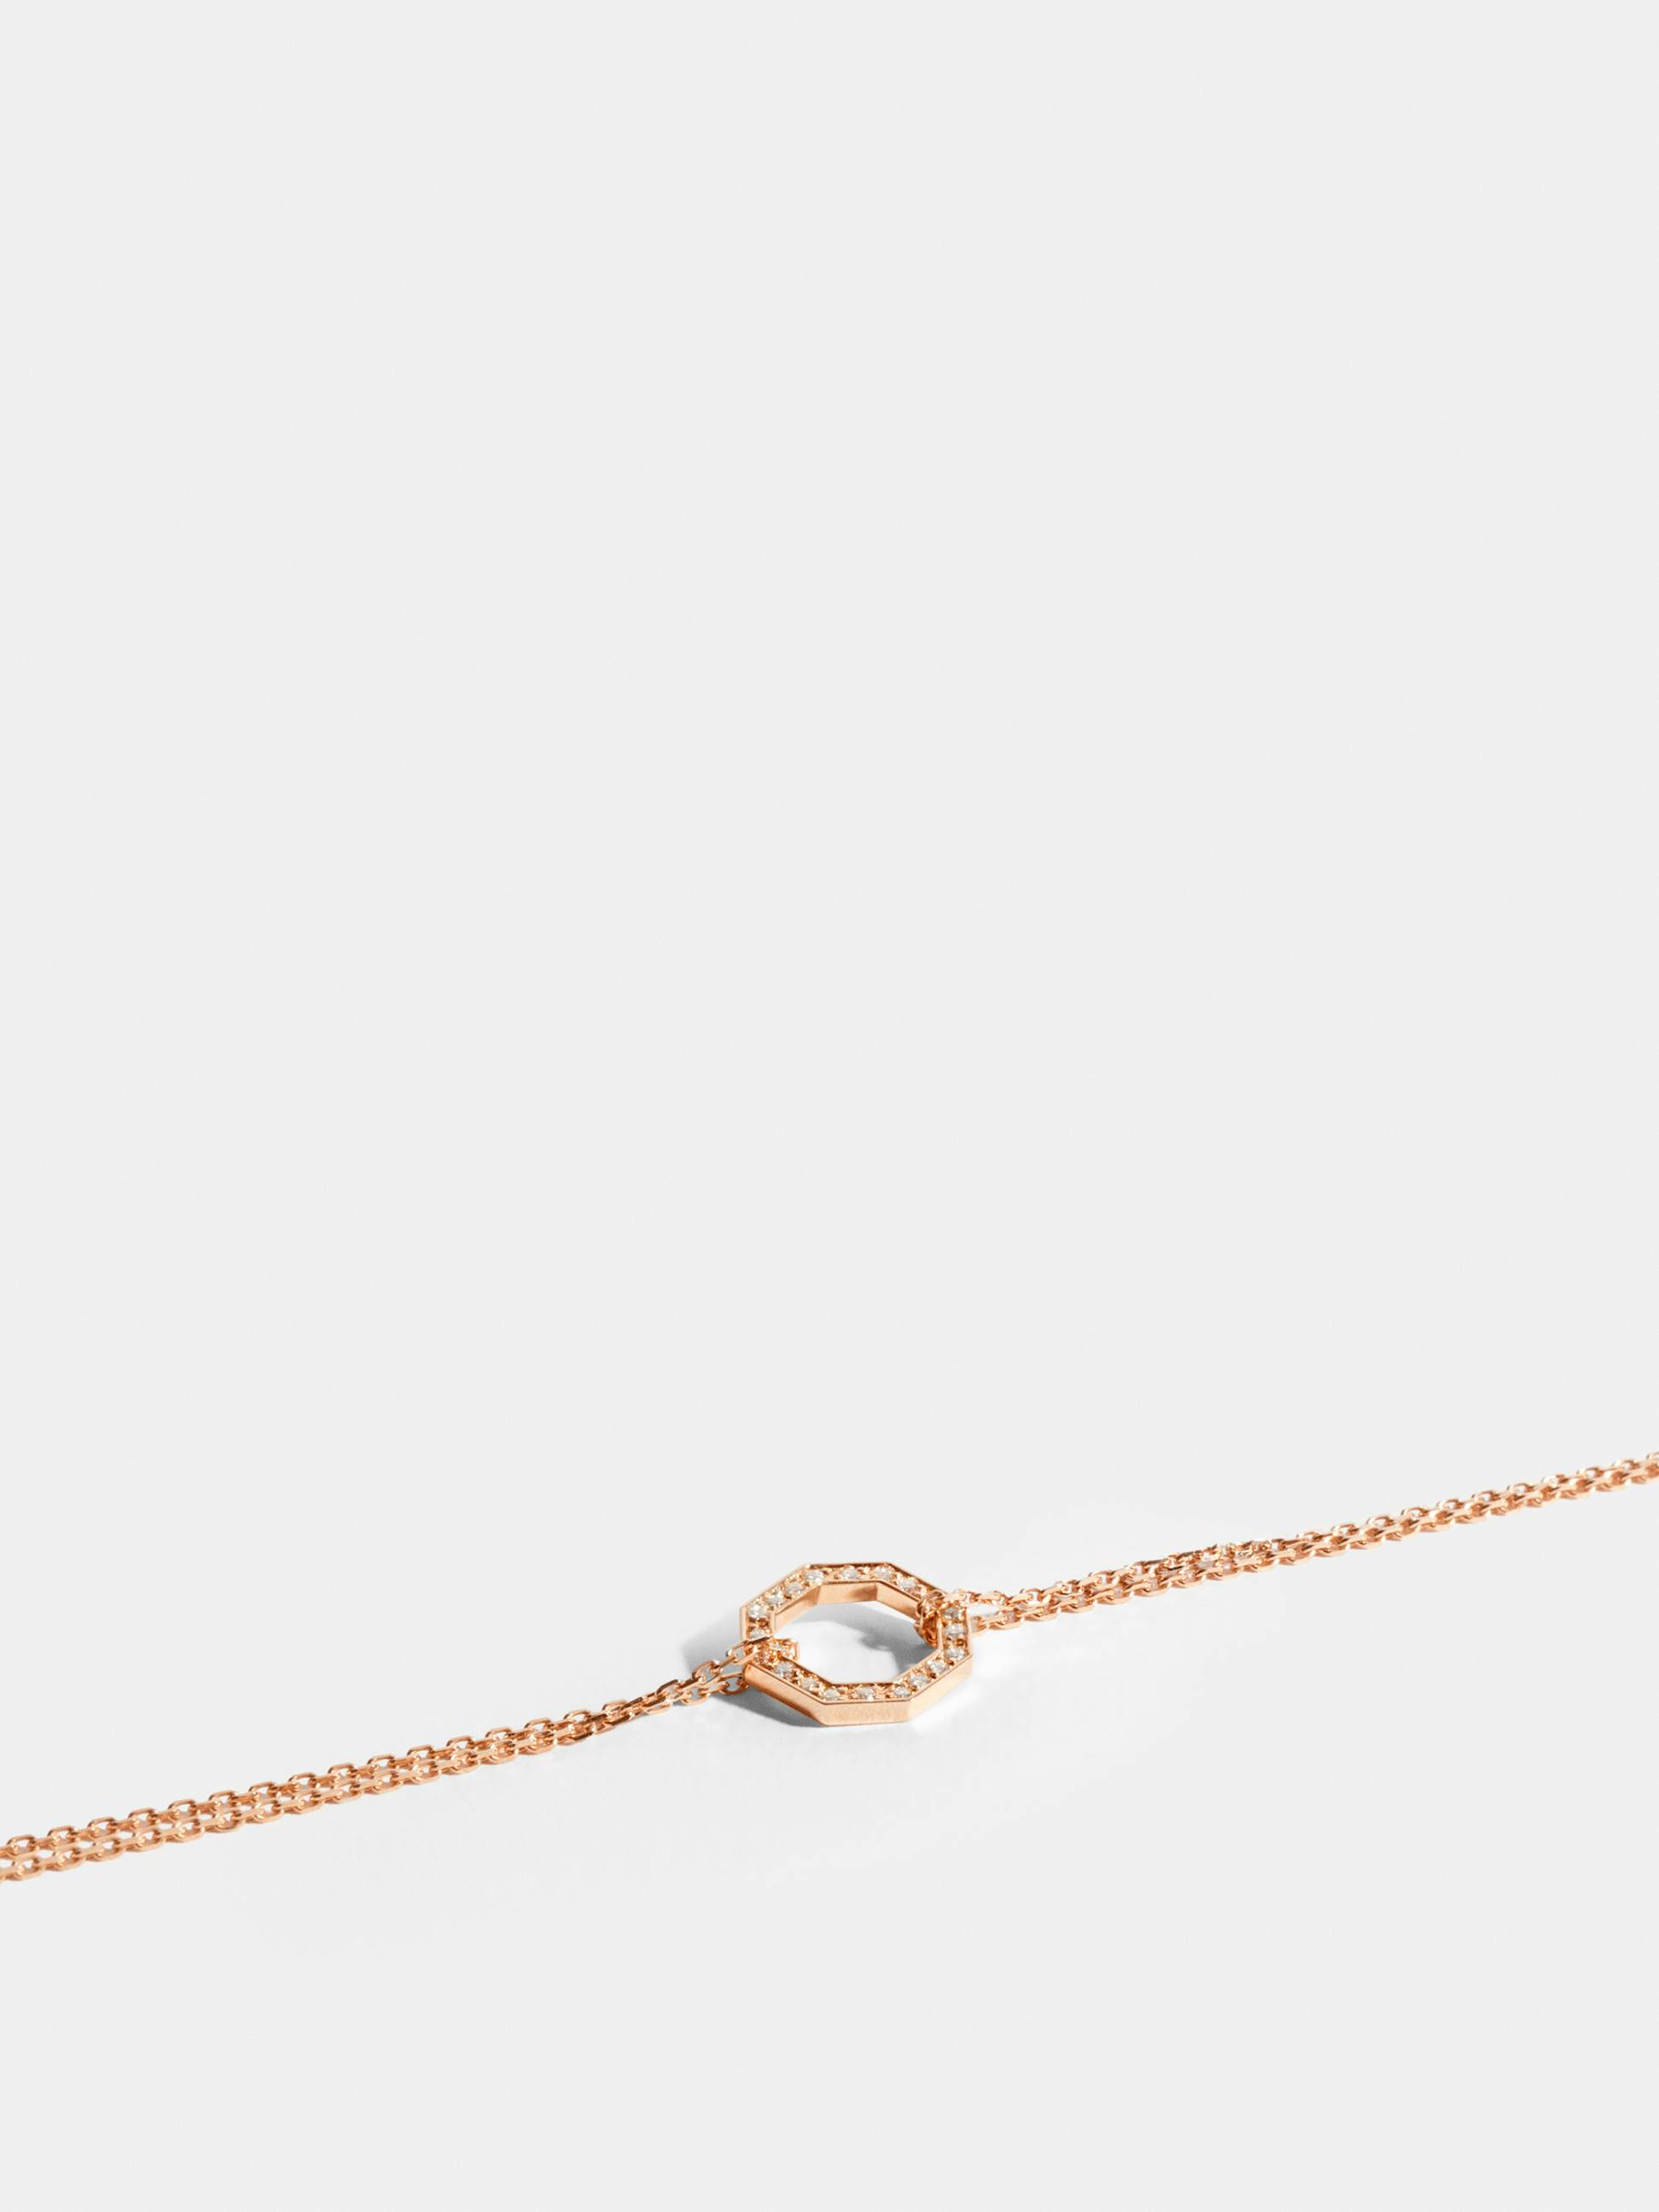 Octogone motif in 18k Fairmined ethical rose gold, paved with lab-grown diamonds, on a chain.